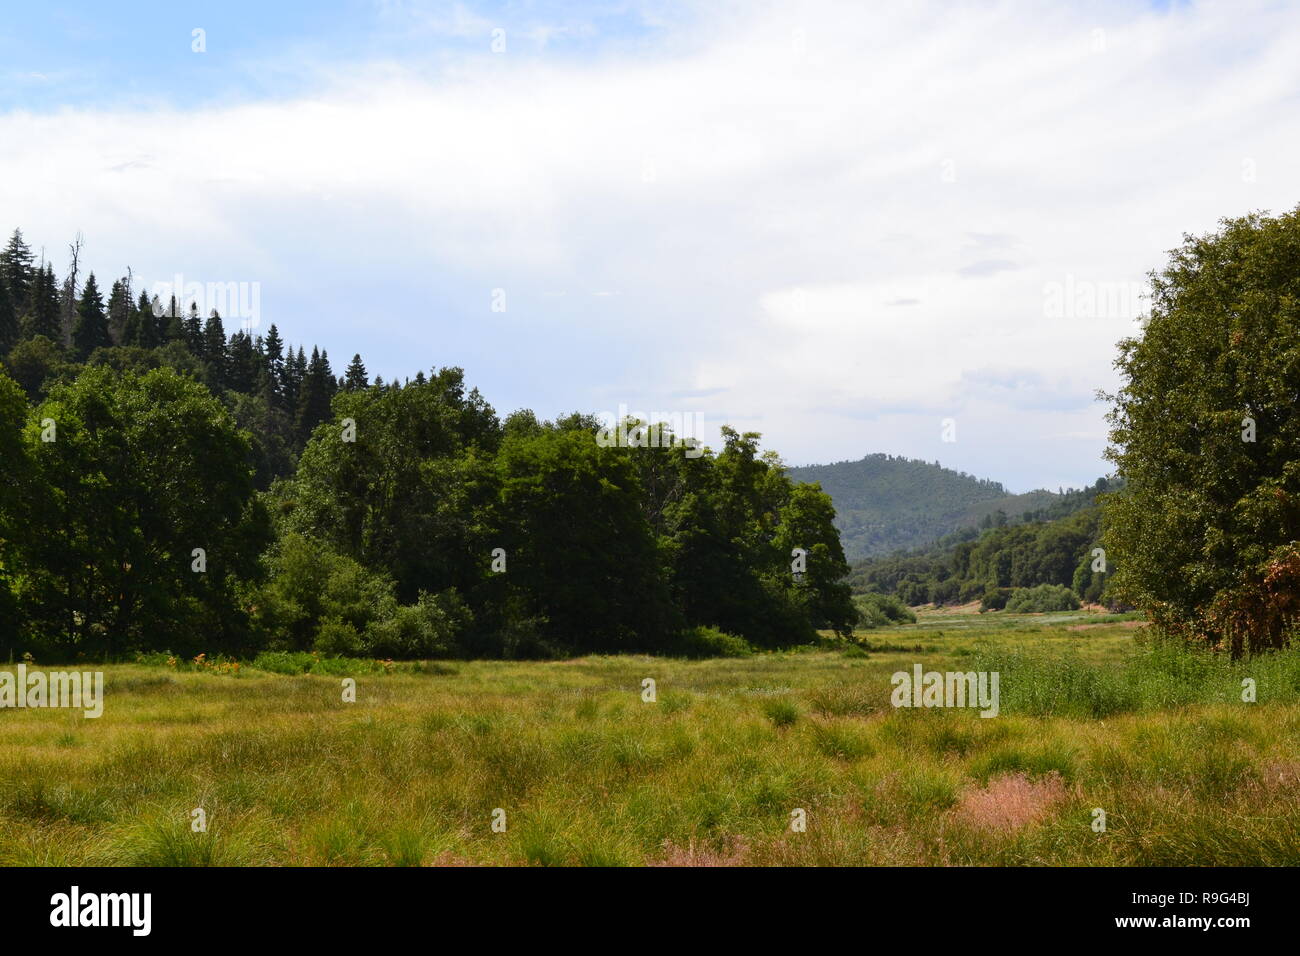 Summer in Doane Valley, Palomar Mountain State Park, California. Doane Ponds and Meadows. Great area for hiking, camping and wildlife watching Stock Photo